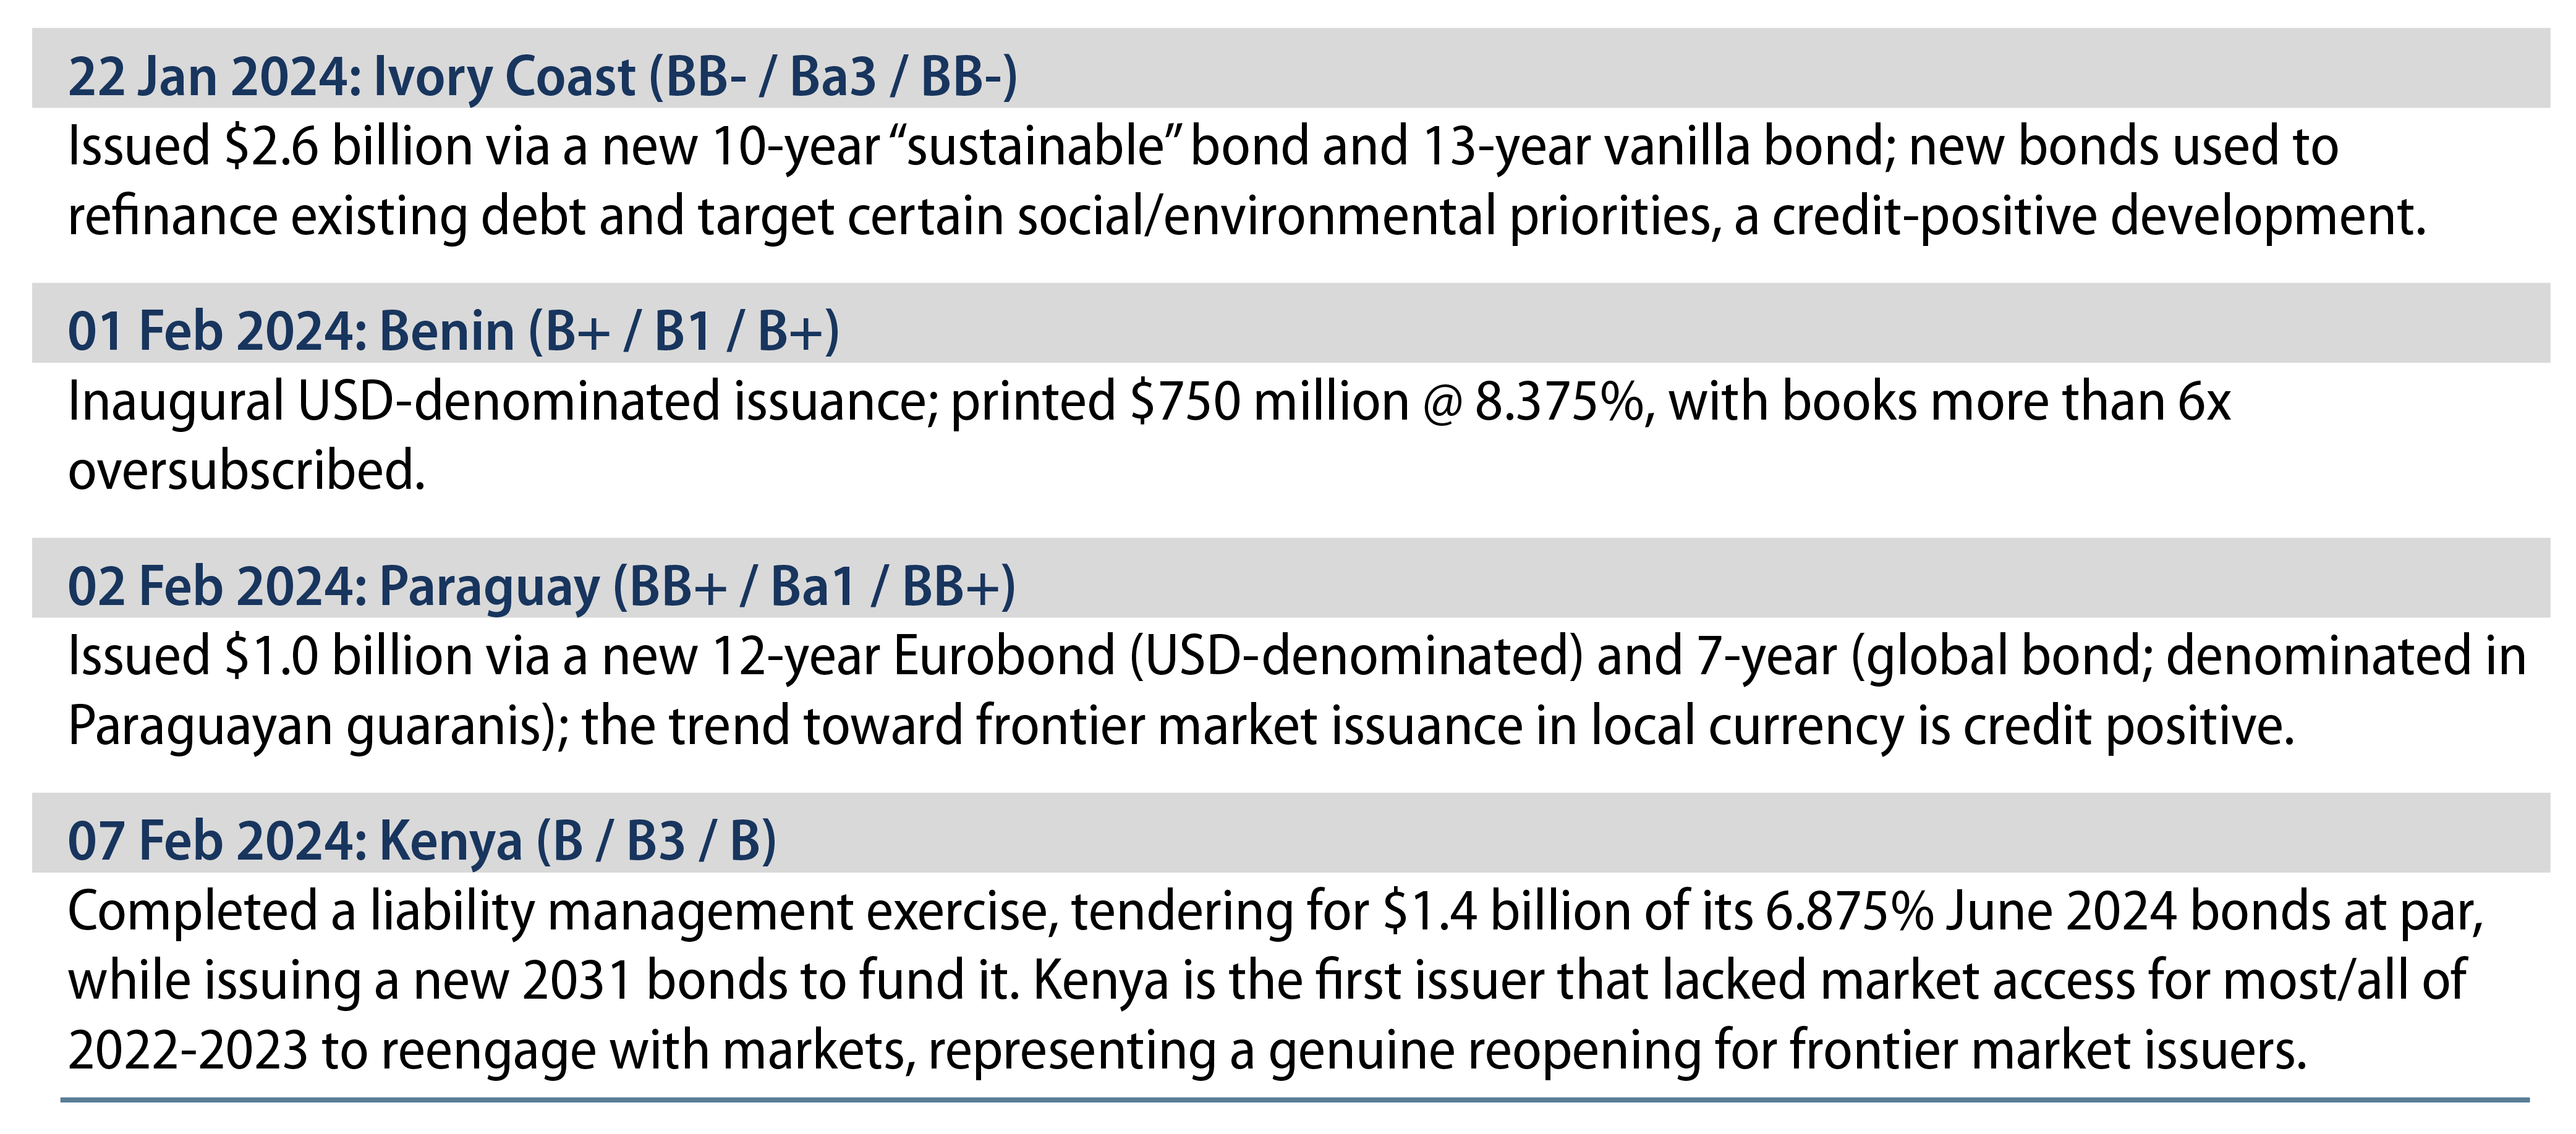 2024 New-Issuance Trends—Gradually, Then Suddenly